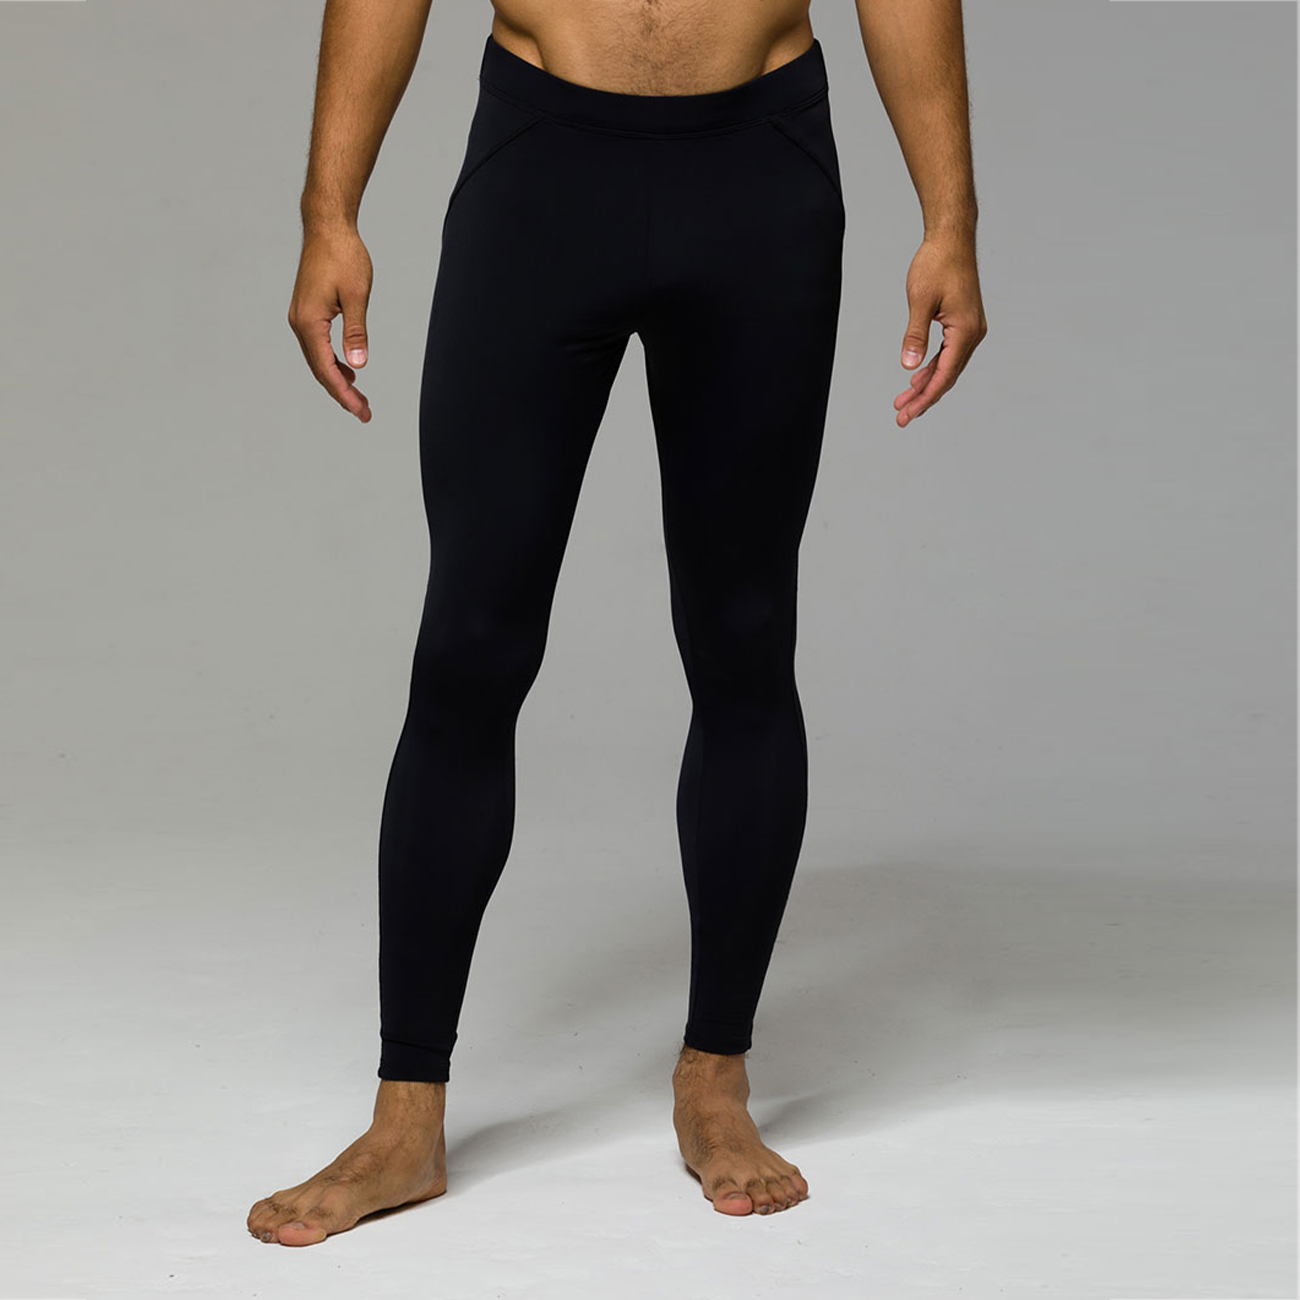 Yoga and Workout wear for men | greenyogashop